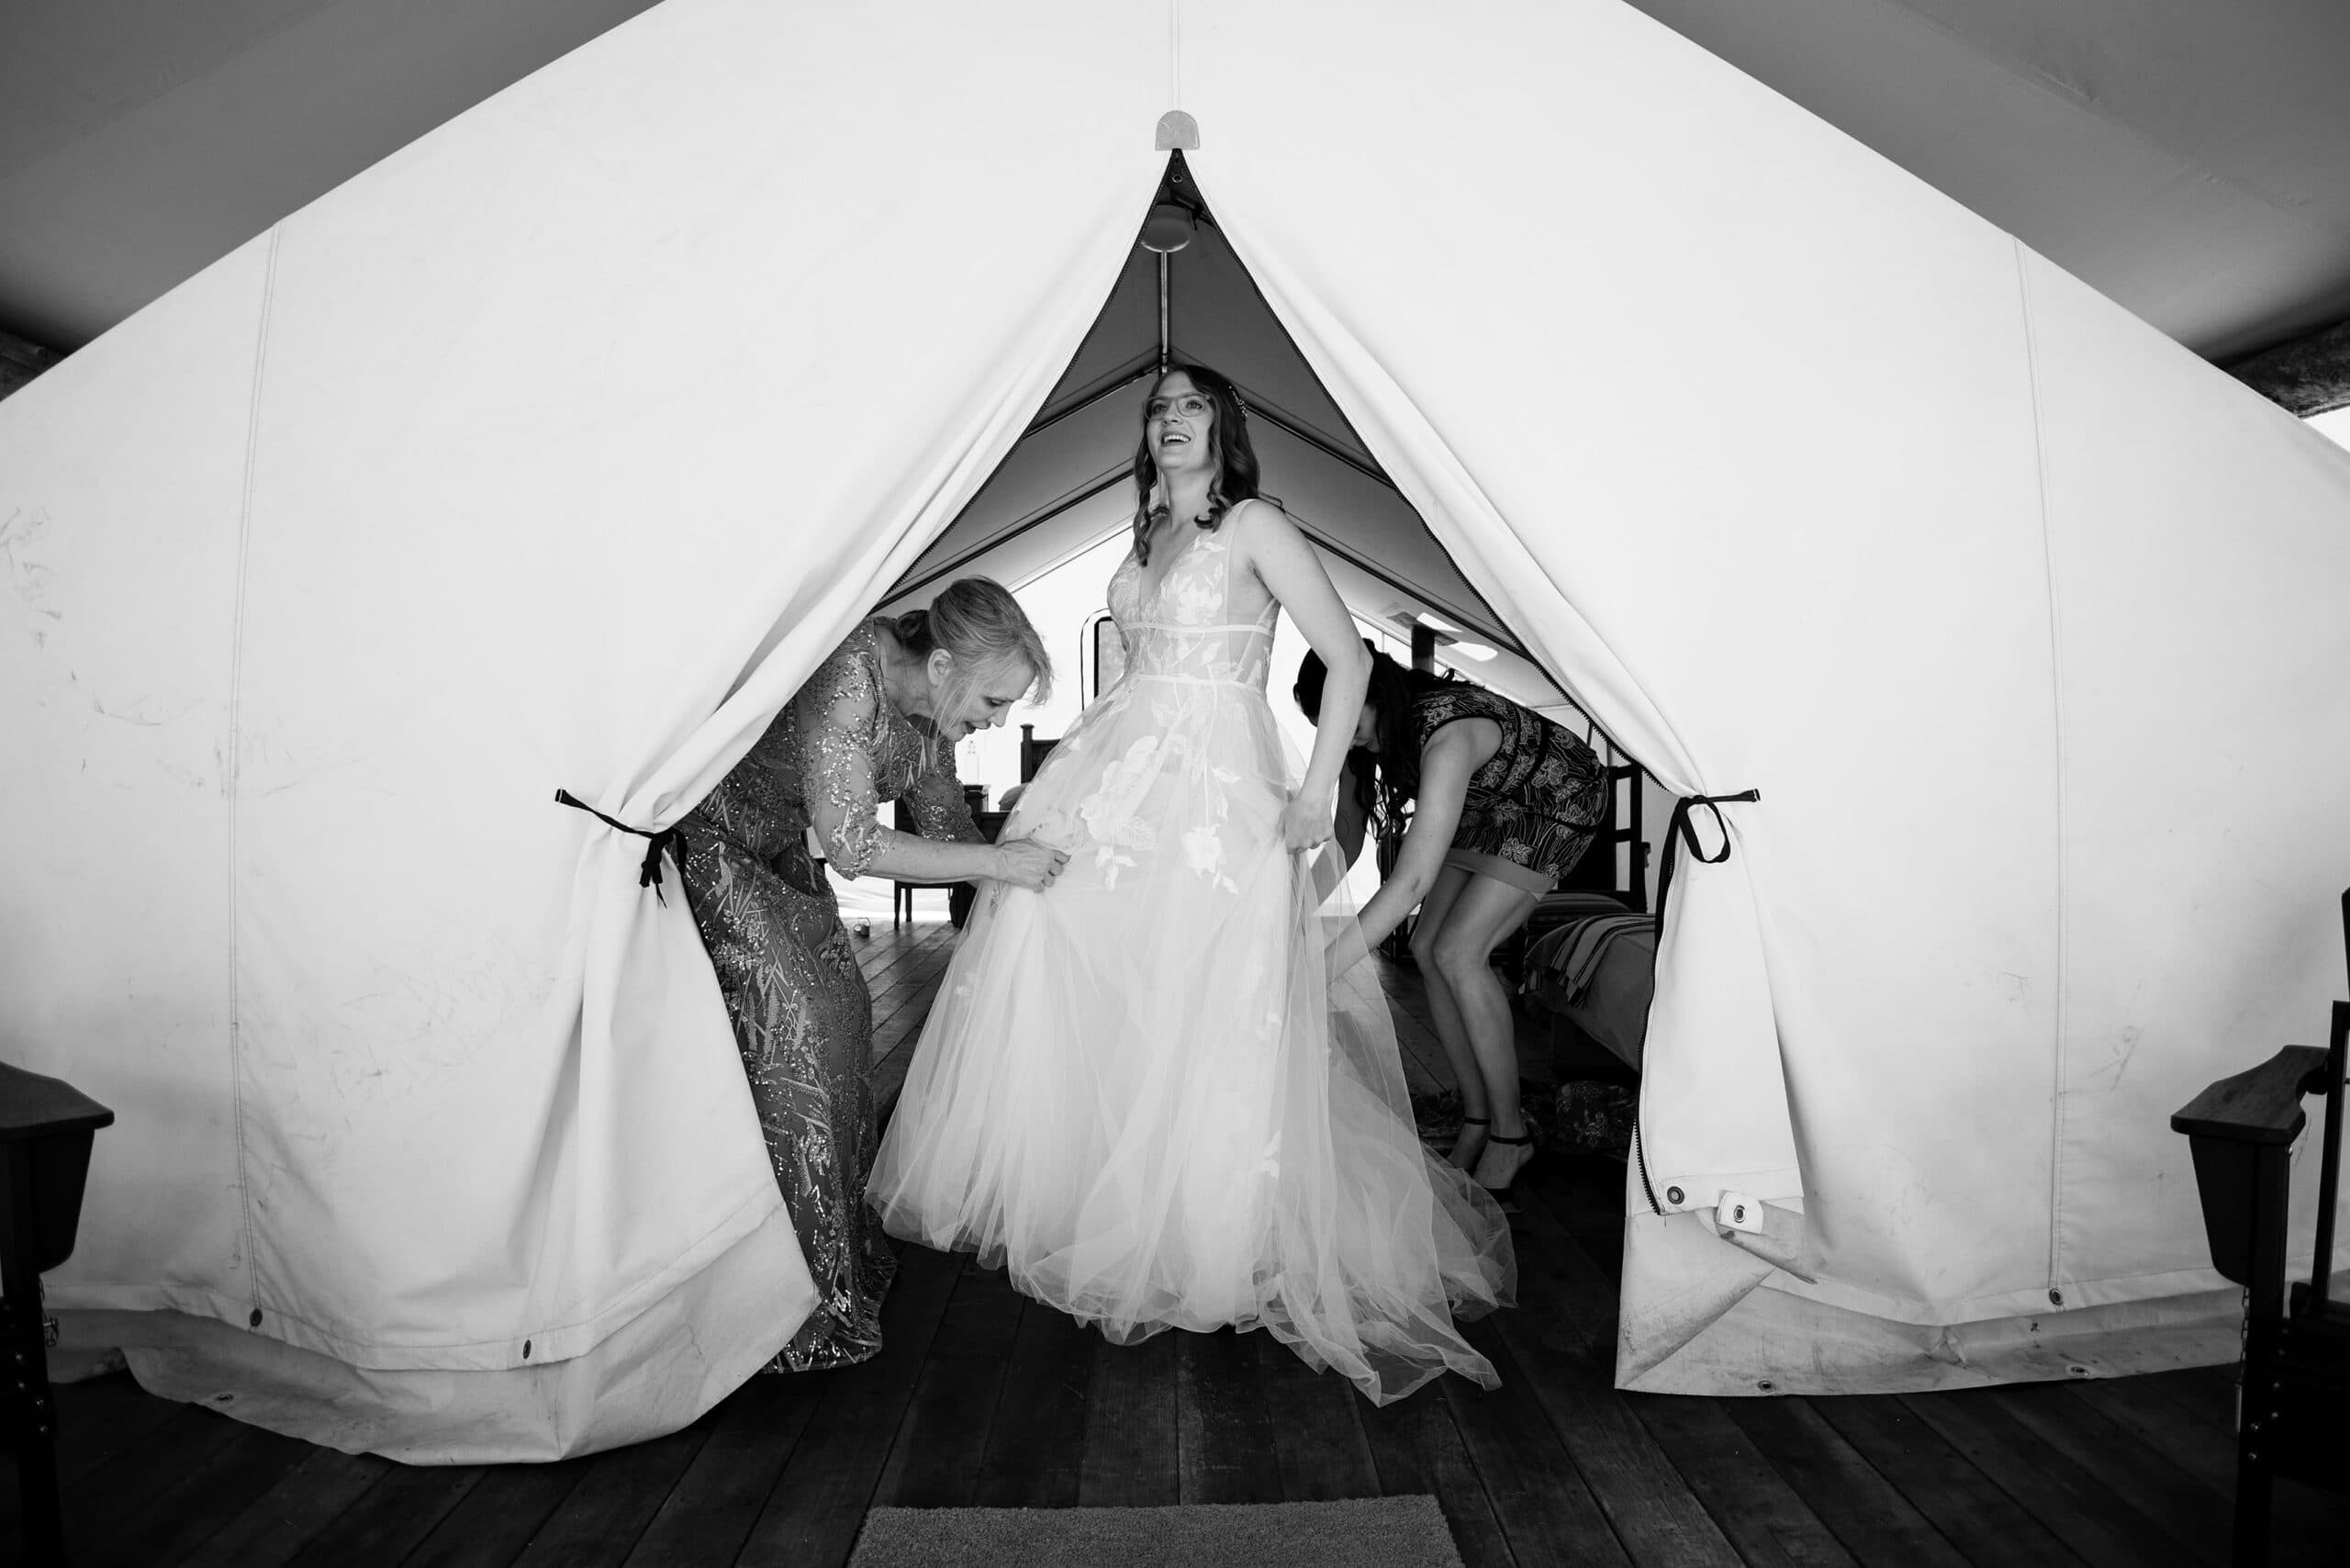 Alice gets help putting on her wedding dress in a tent at Piney River Ranch